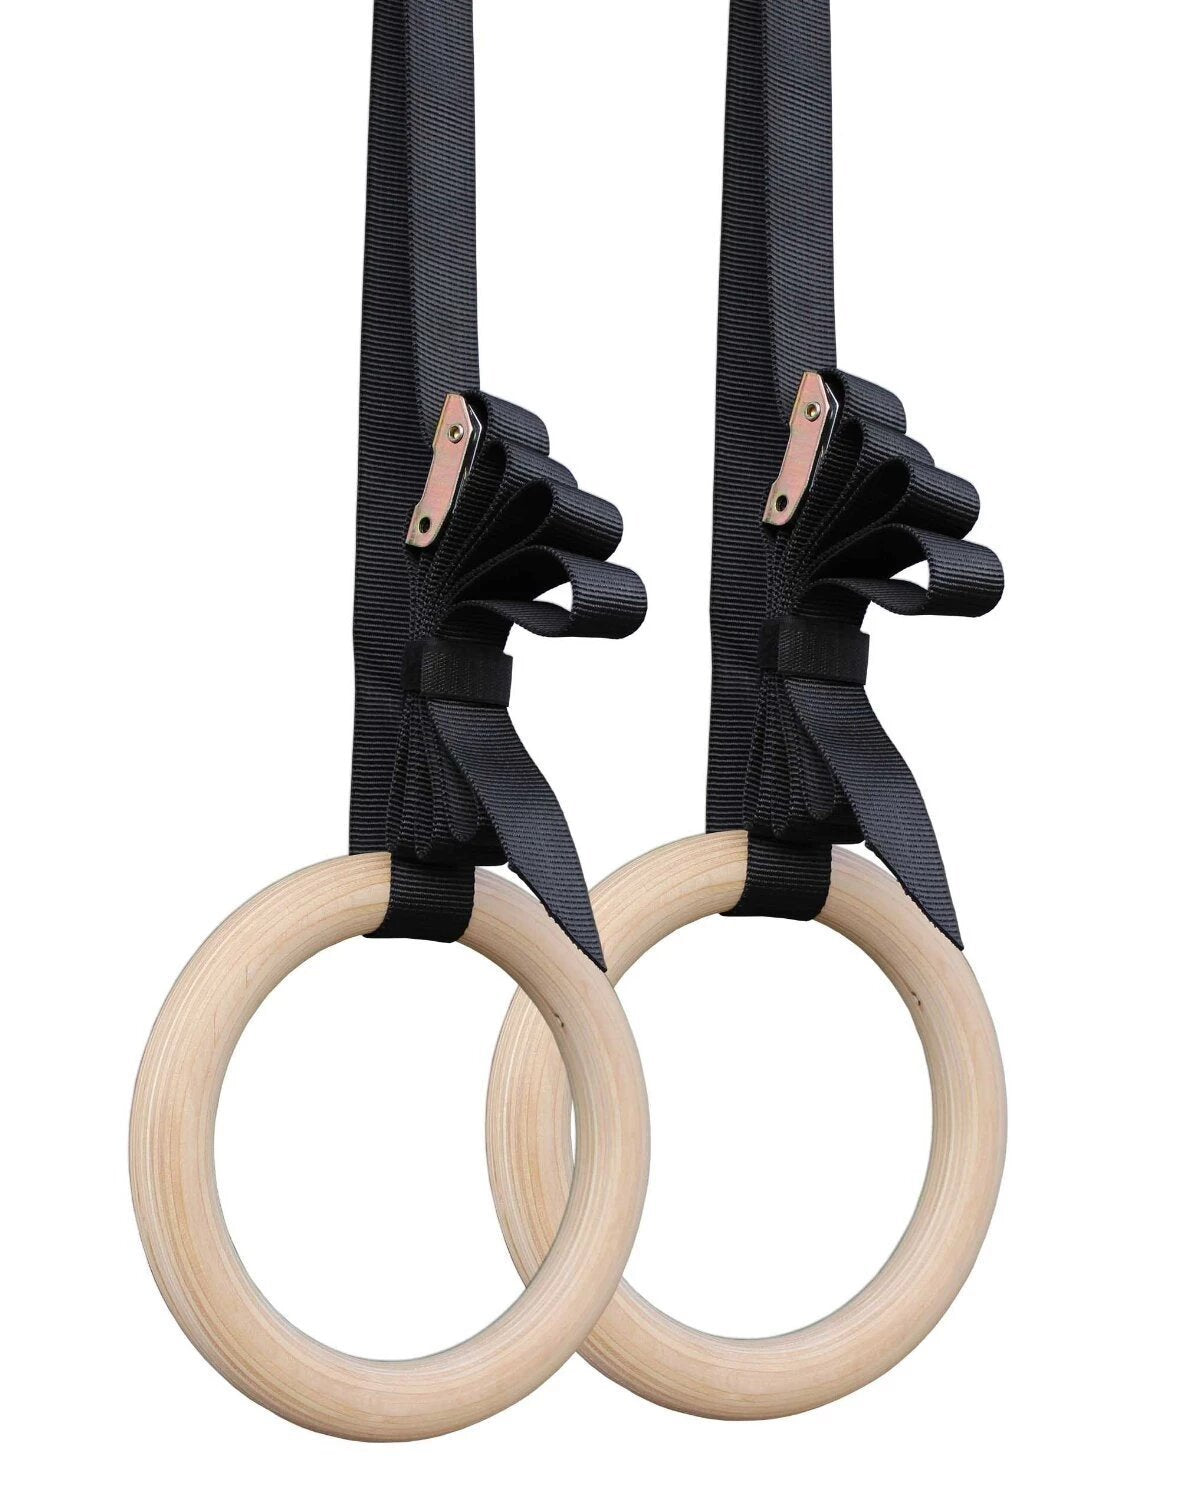 Rings with Adjustable Straps